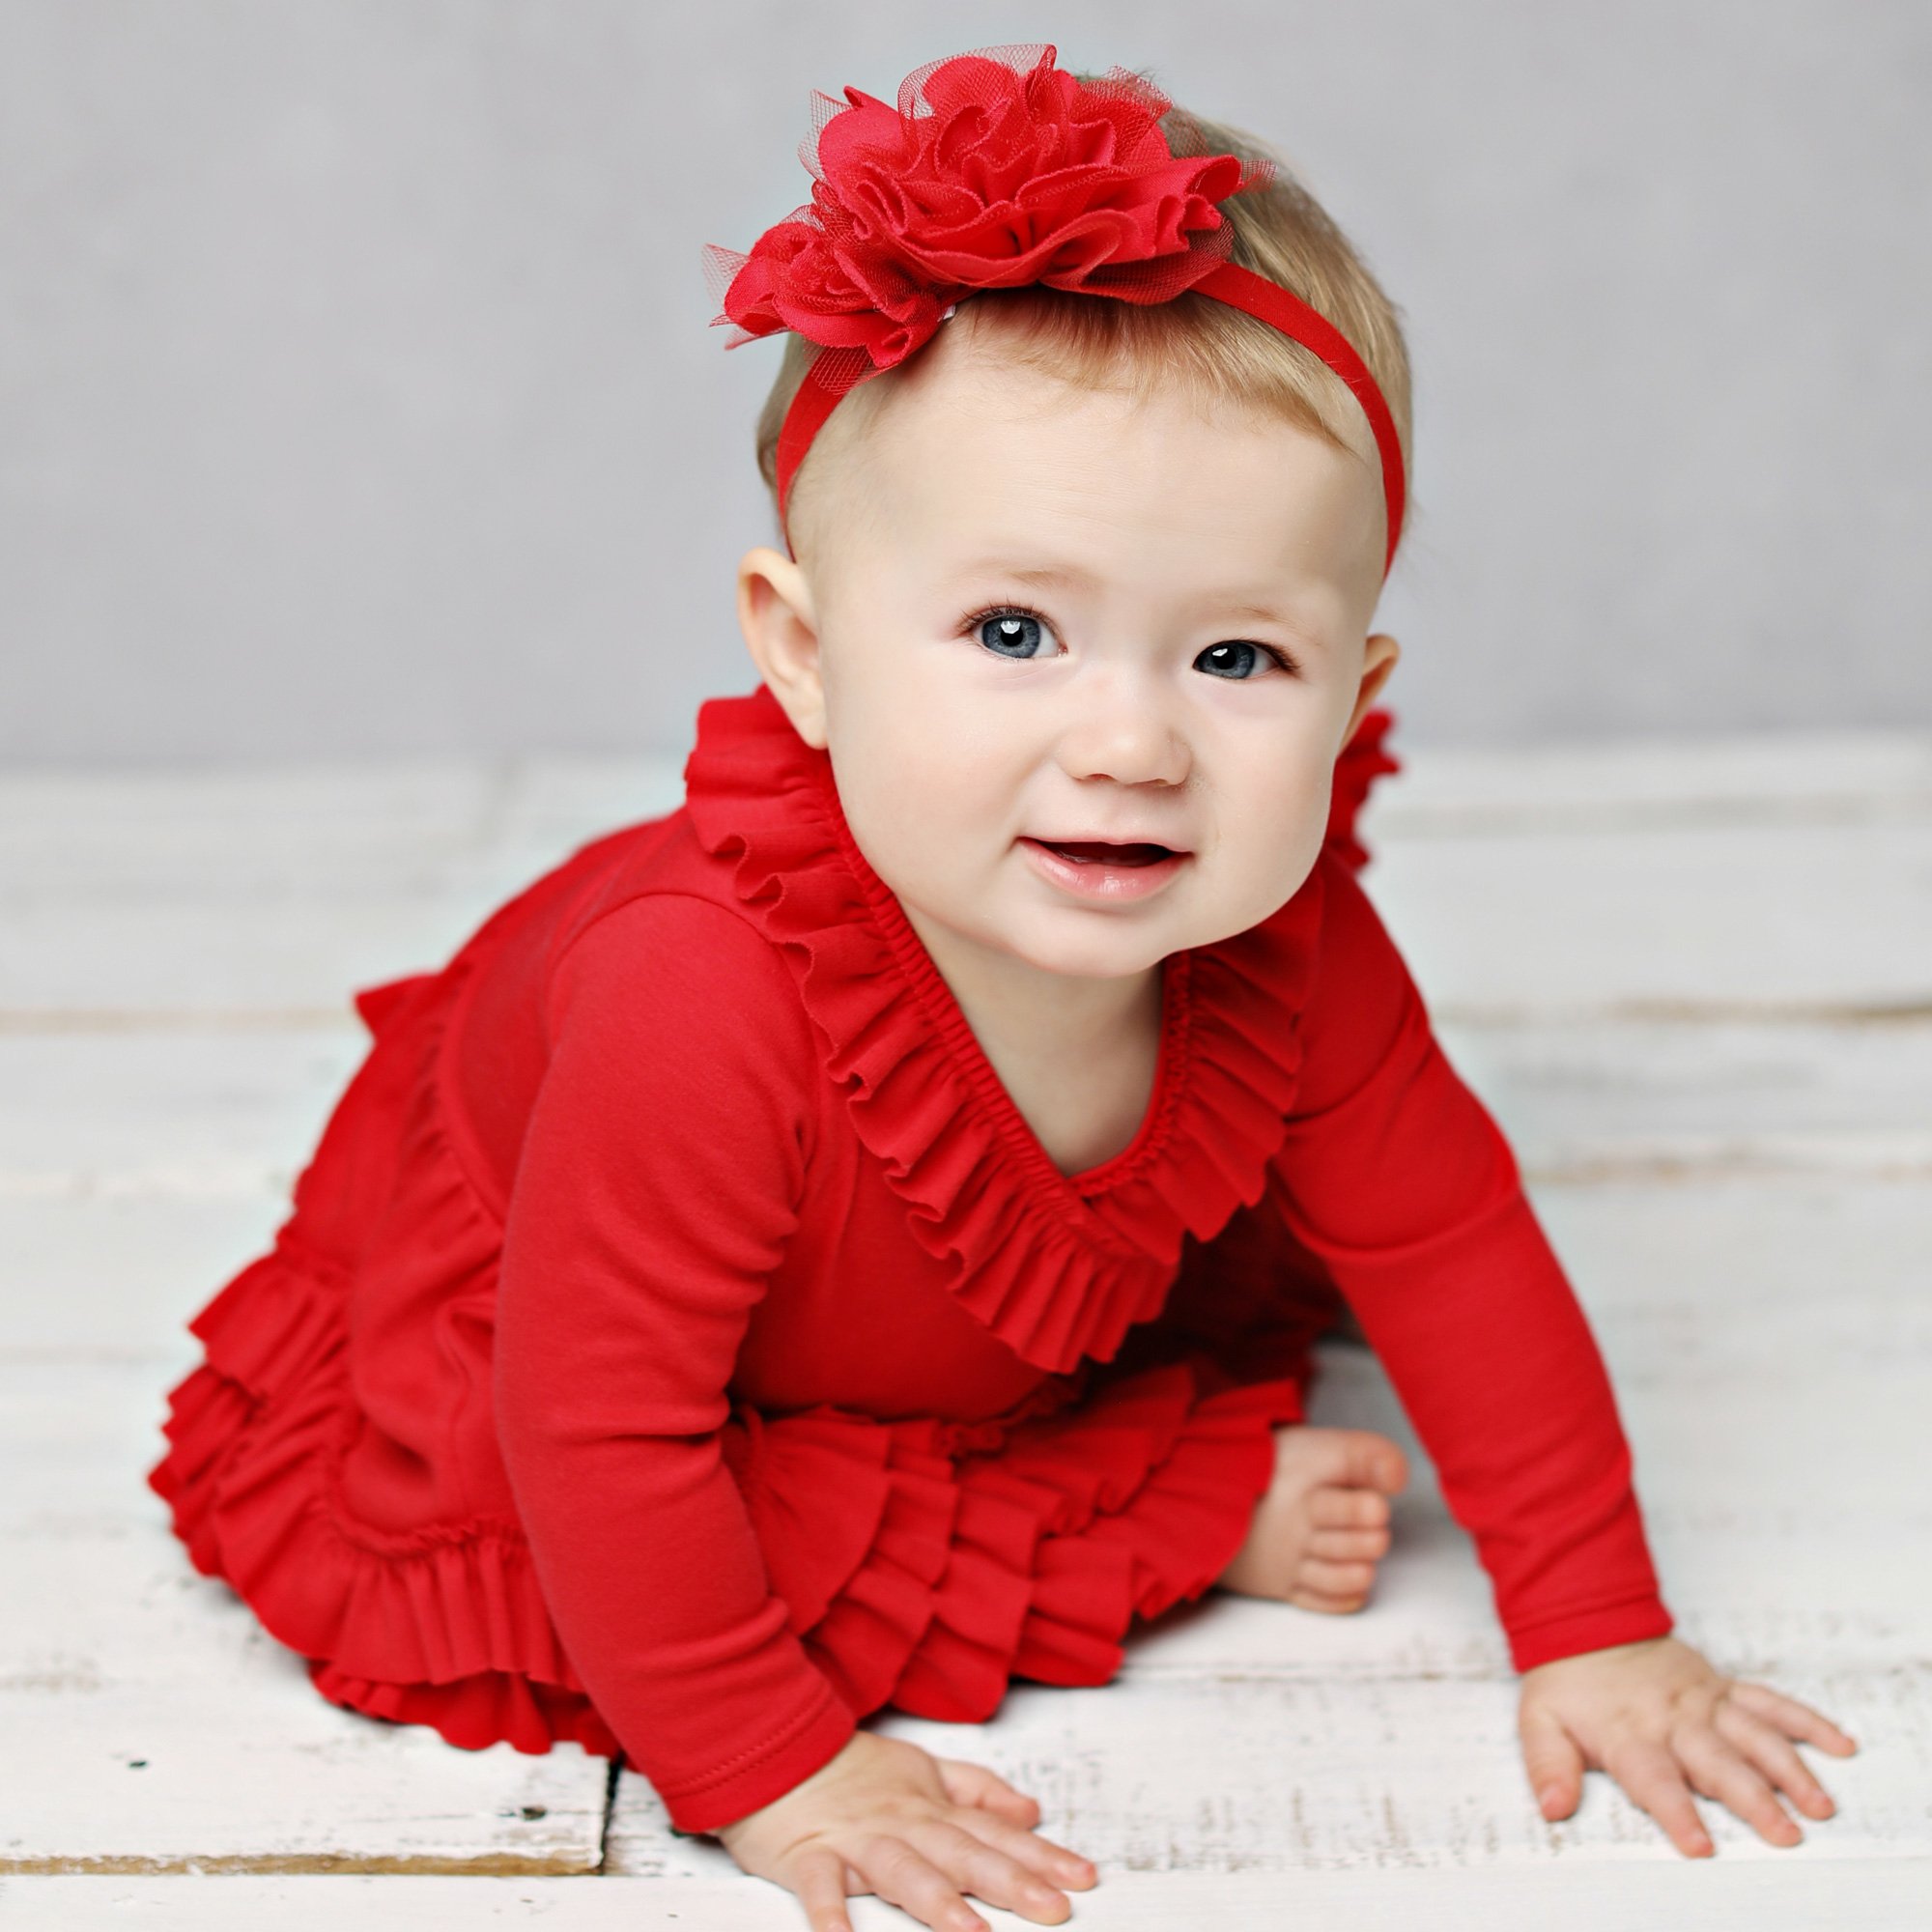 Lemon Loves Layette Grace True Red Dress for Baby Girls and Toddlers